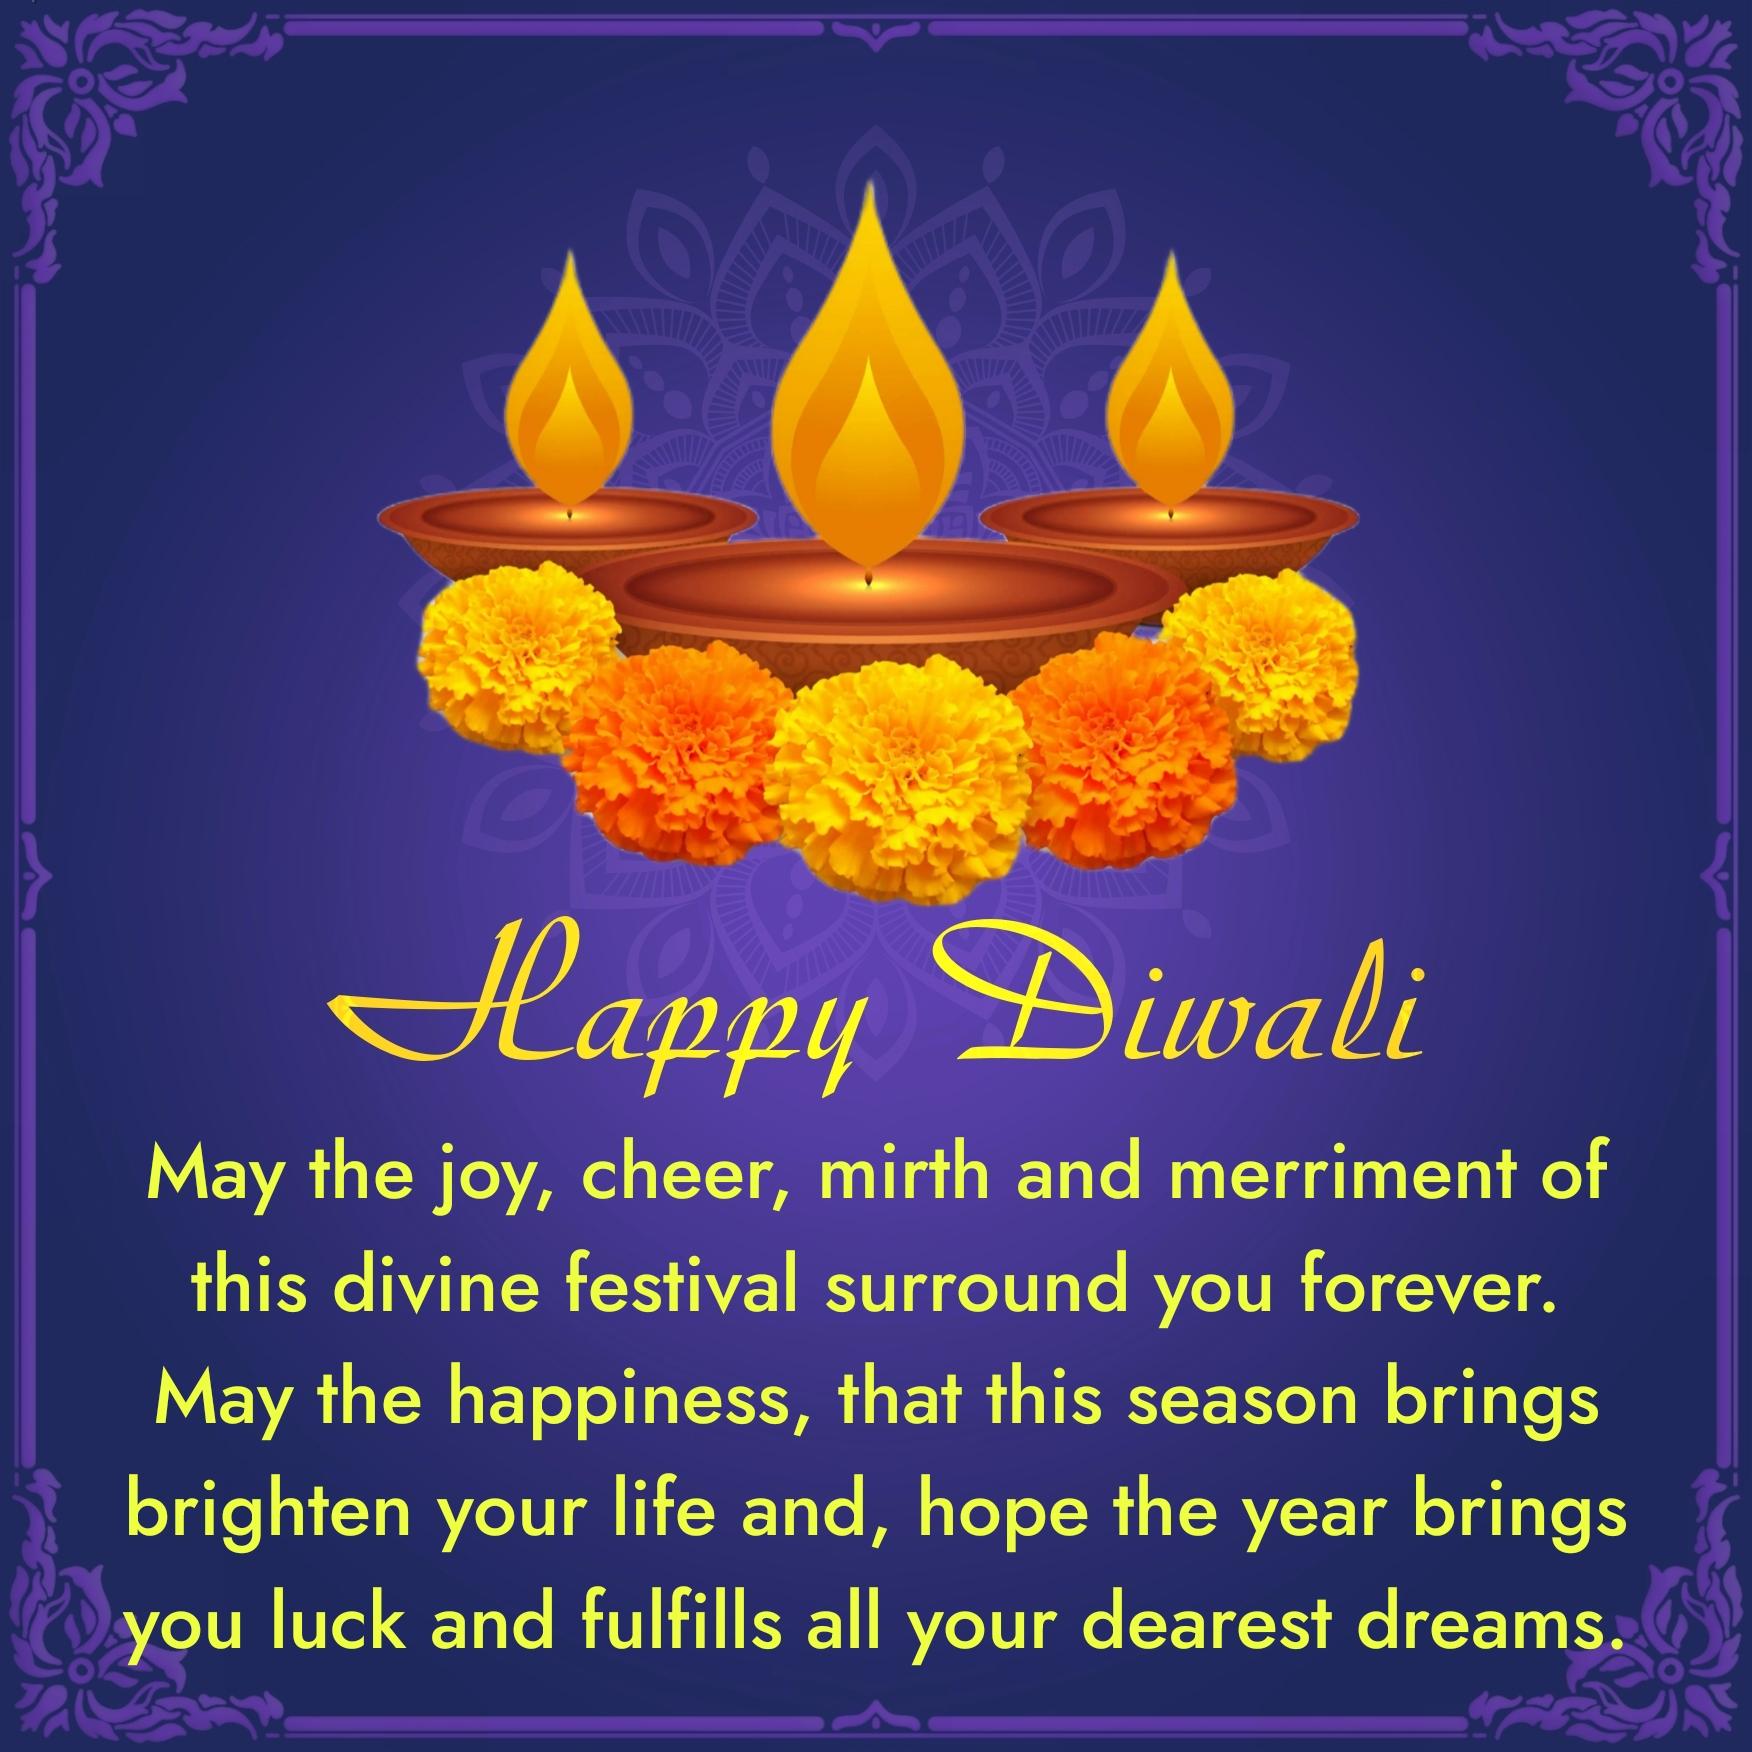 May the joy cheer mirth and merriment of this divine festival